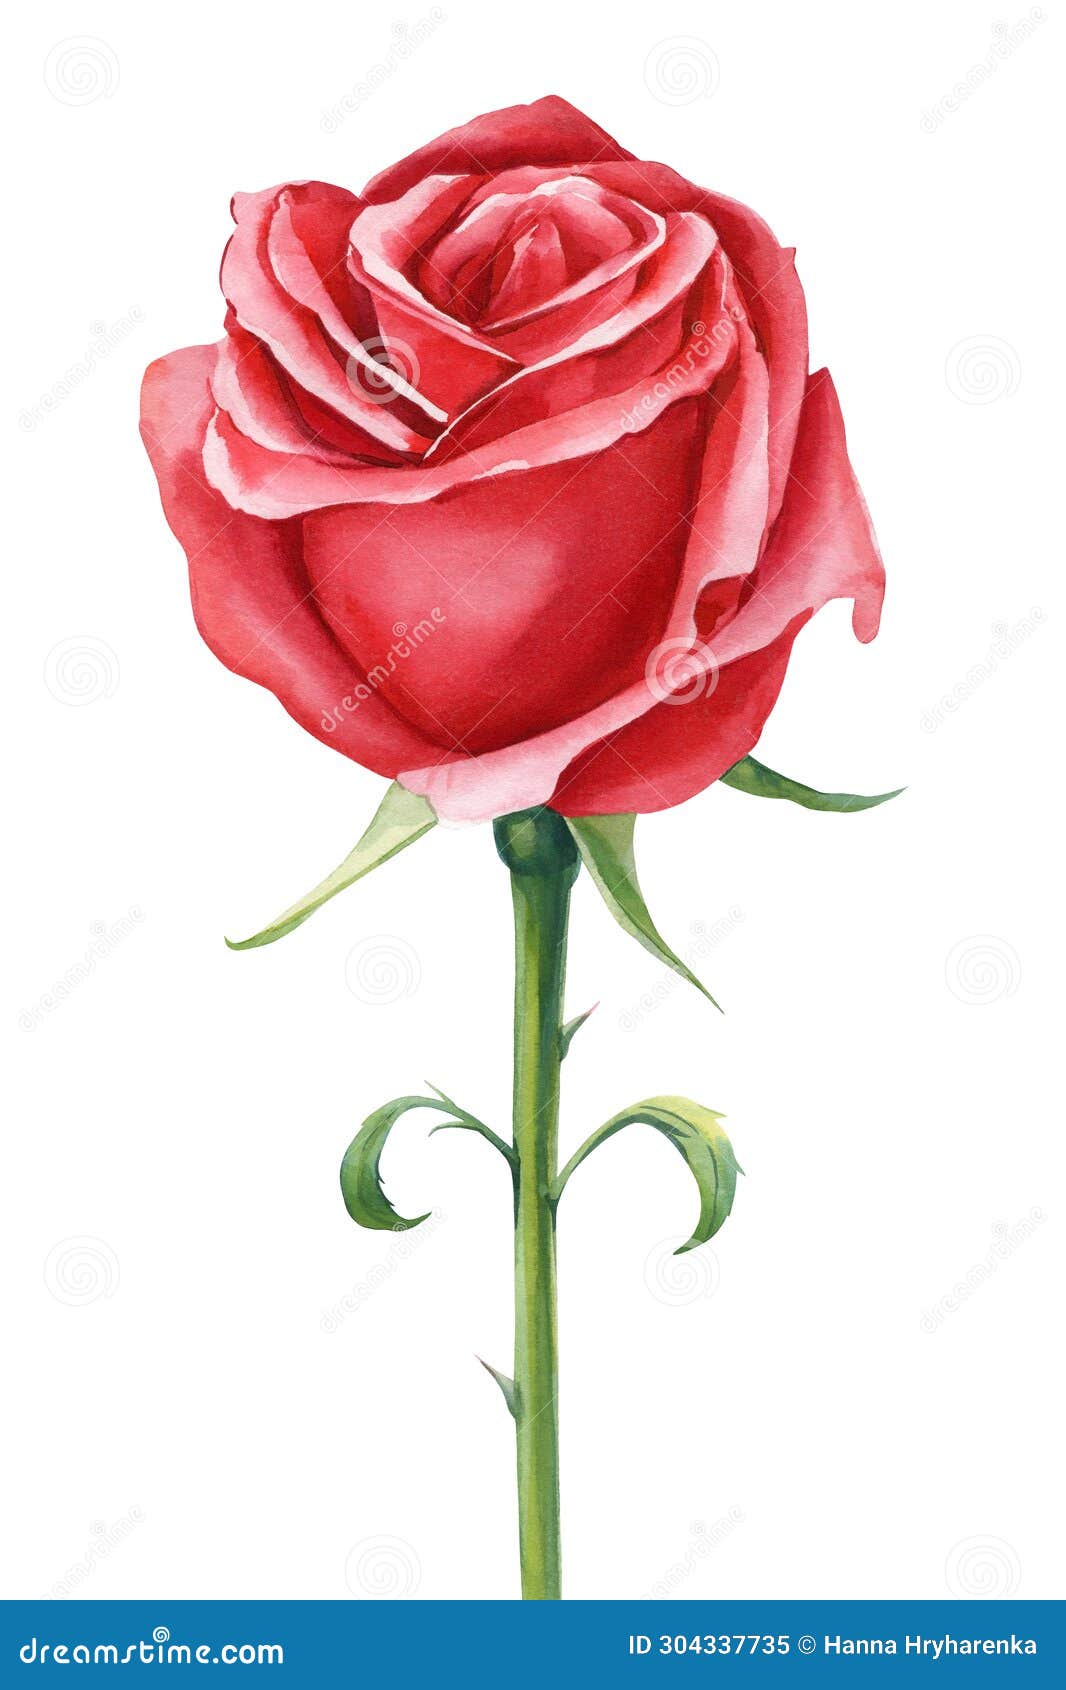 Red Rose Beautiful Flower, Isolated White Background, Watercolor ...